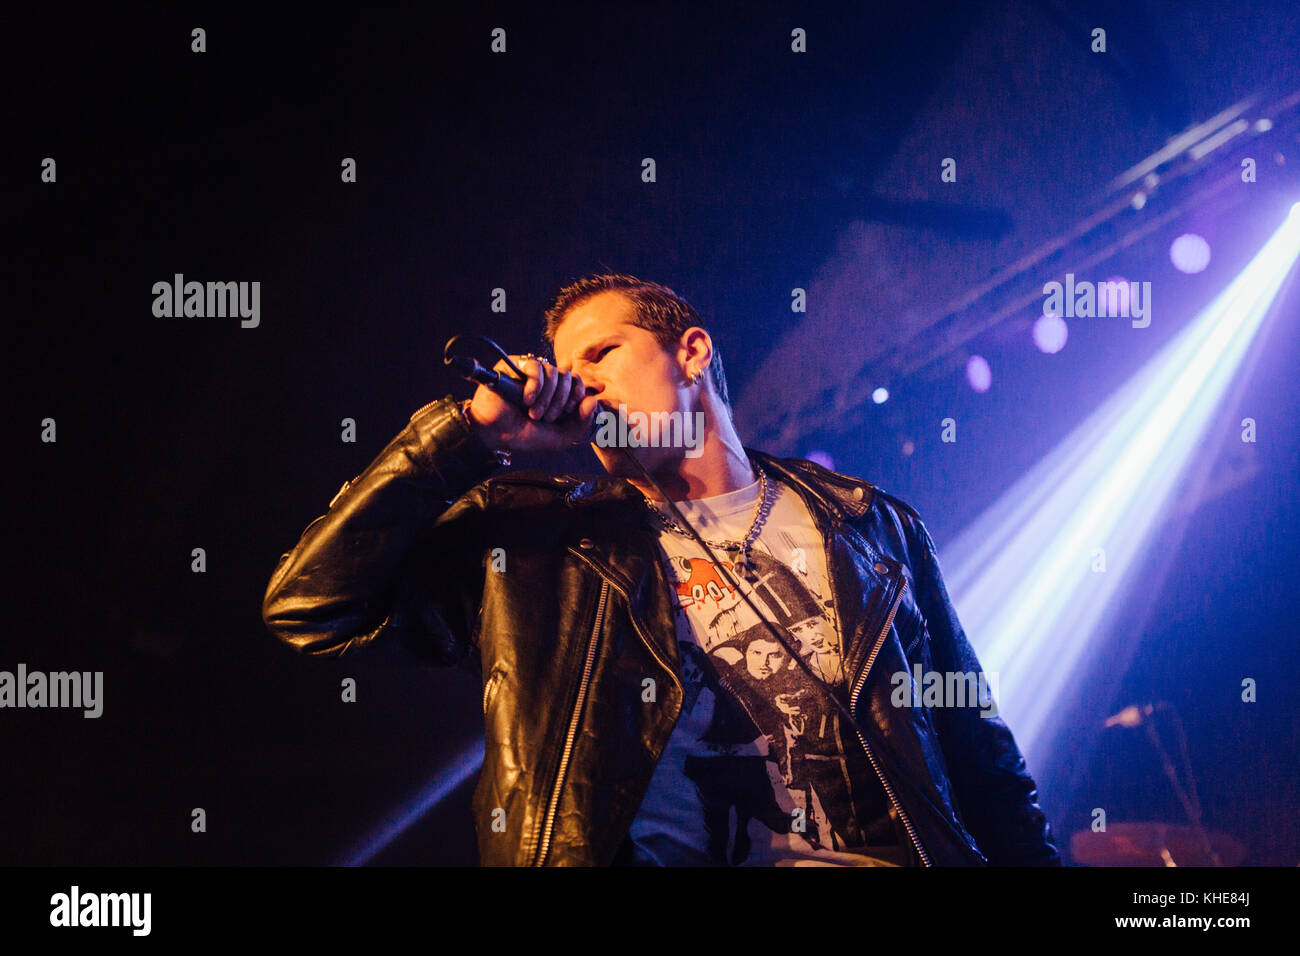 The Danish punk band Night Fever performs a live concert at Amager Bio in  Copenhagen. Here vocalist Salomon Segers is seen live on stage. Denmark,  15/06 2016 Stock Photo - Alamy